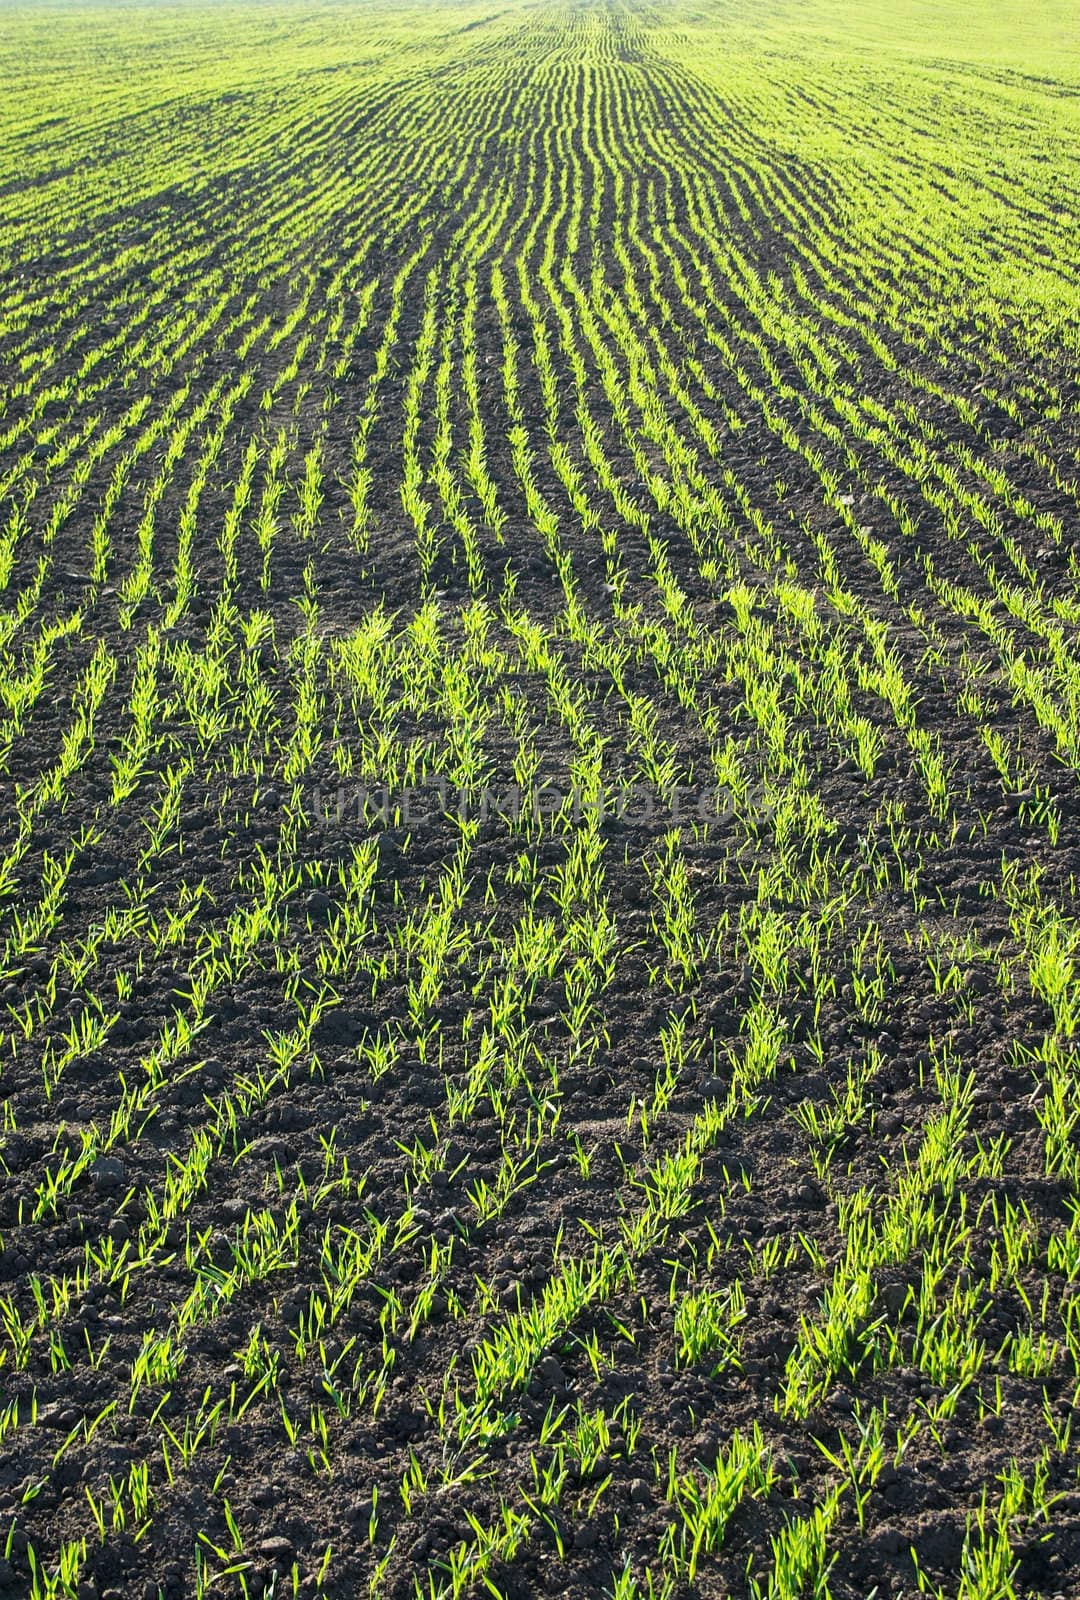 Growing wheat on the field at spring